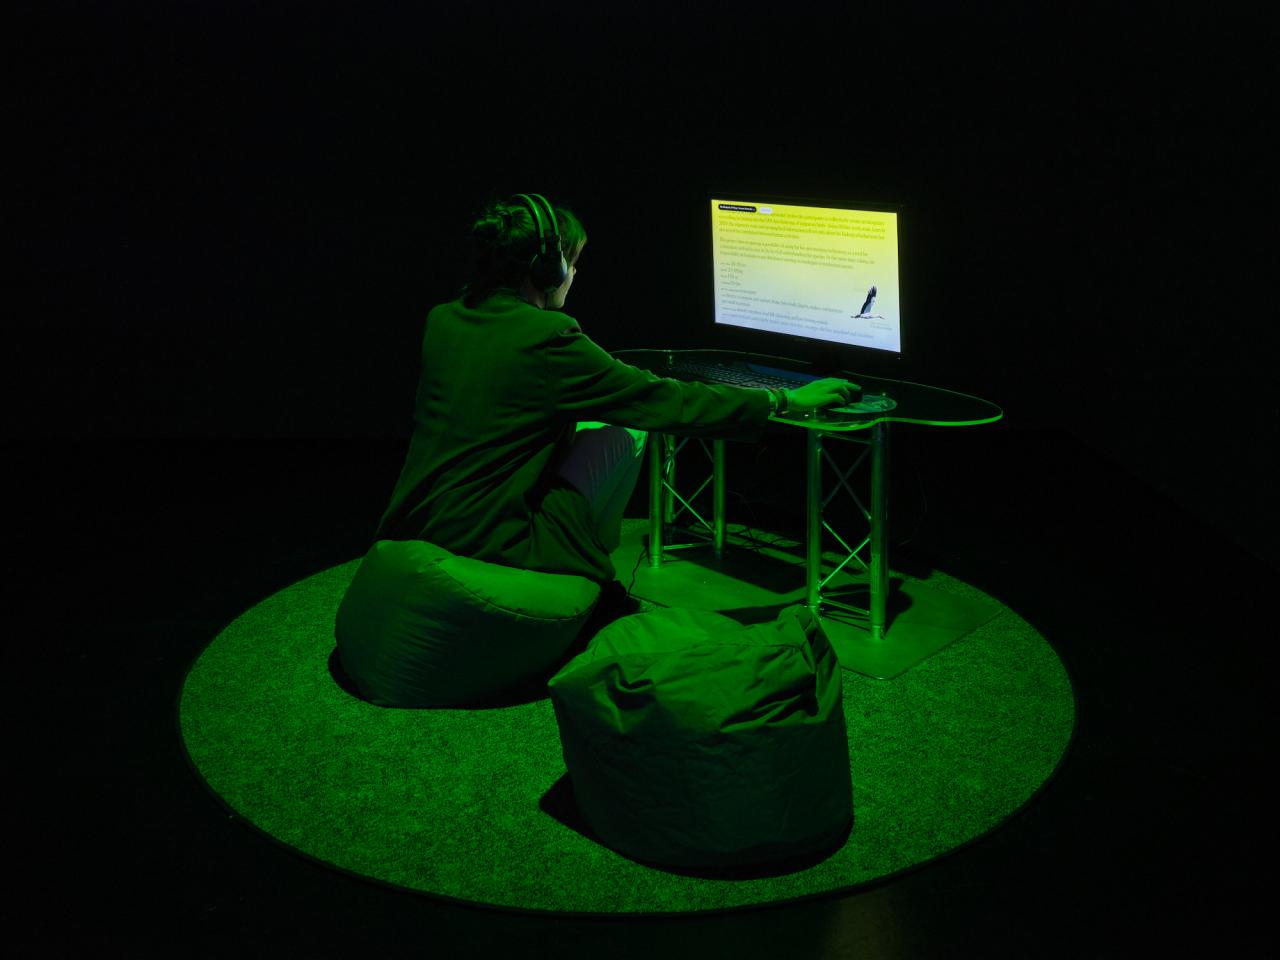 The picture shows a dark room with a green illuminated area in the middle. In this area there is a computer in front of which a young woman is sitting in a beanbag and looking at the computer screen.